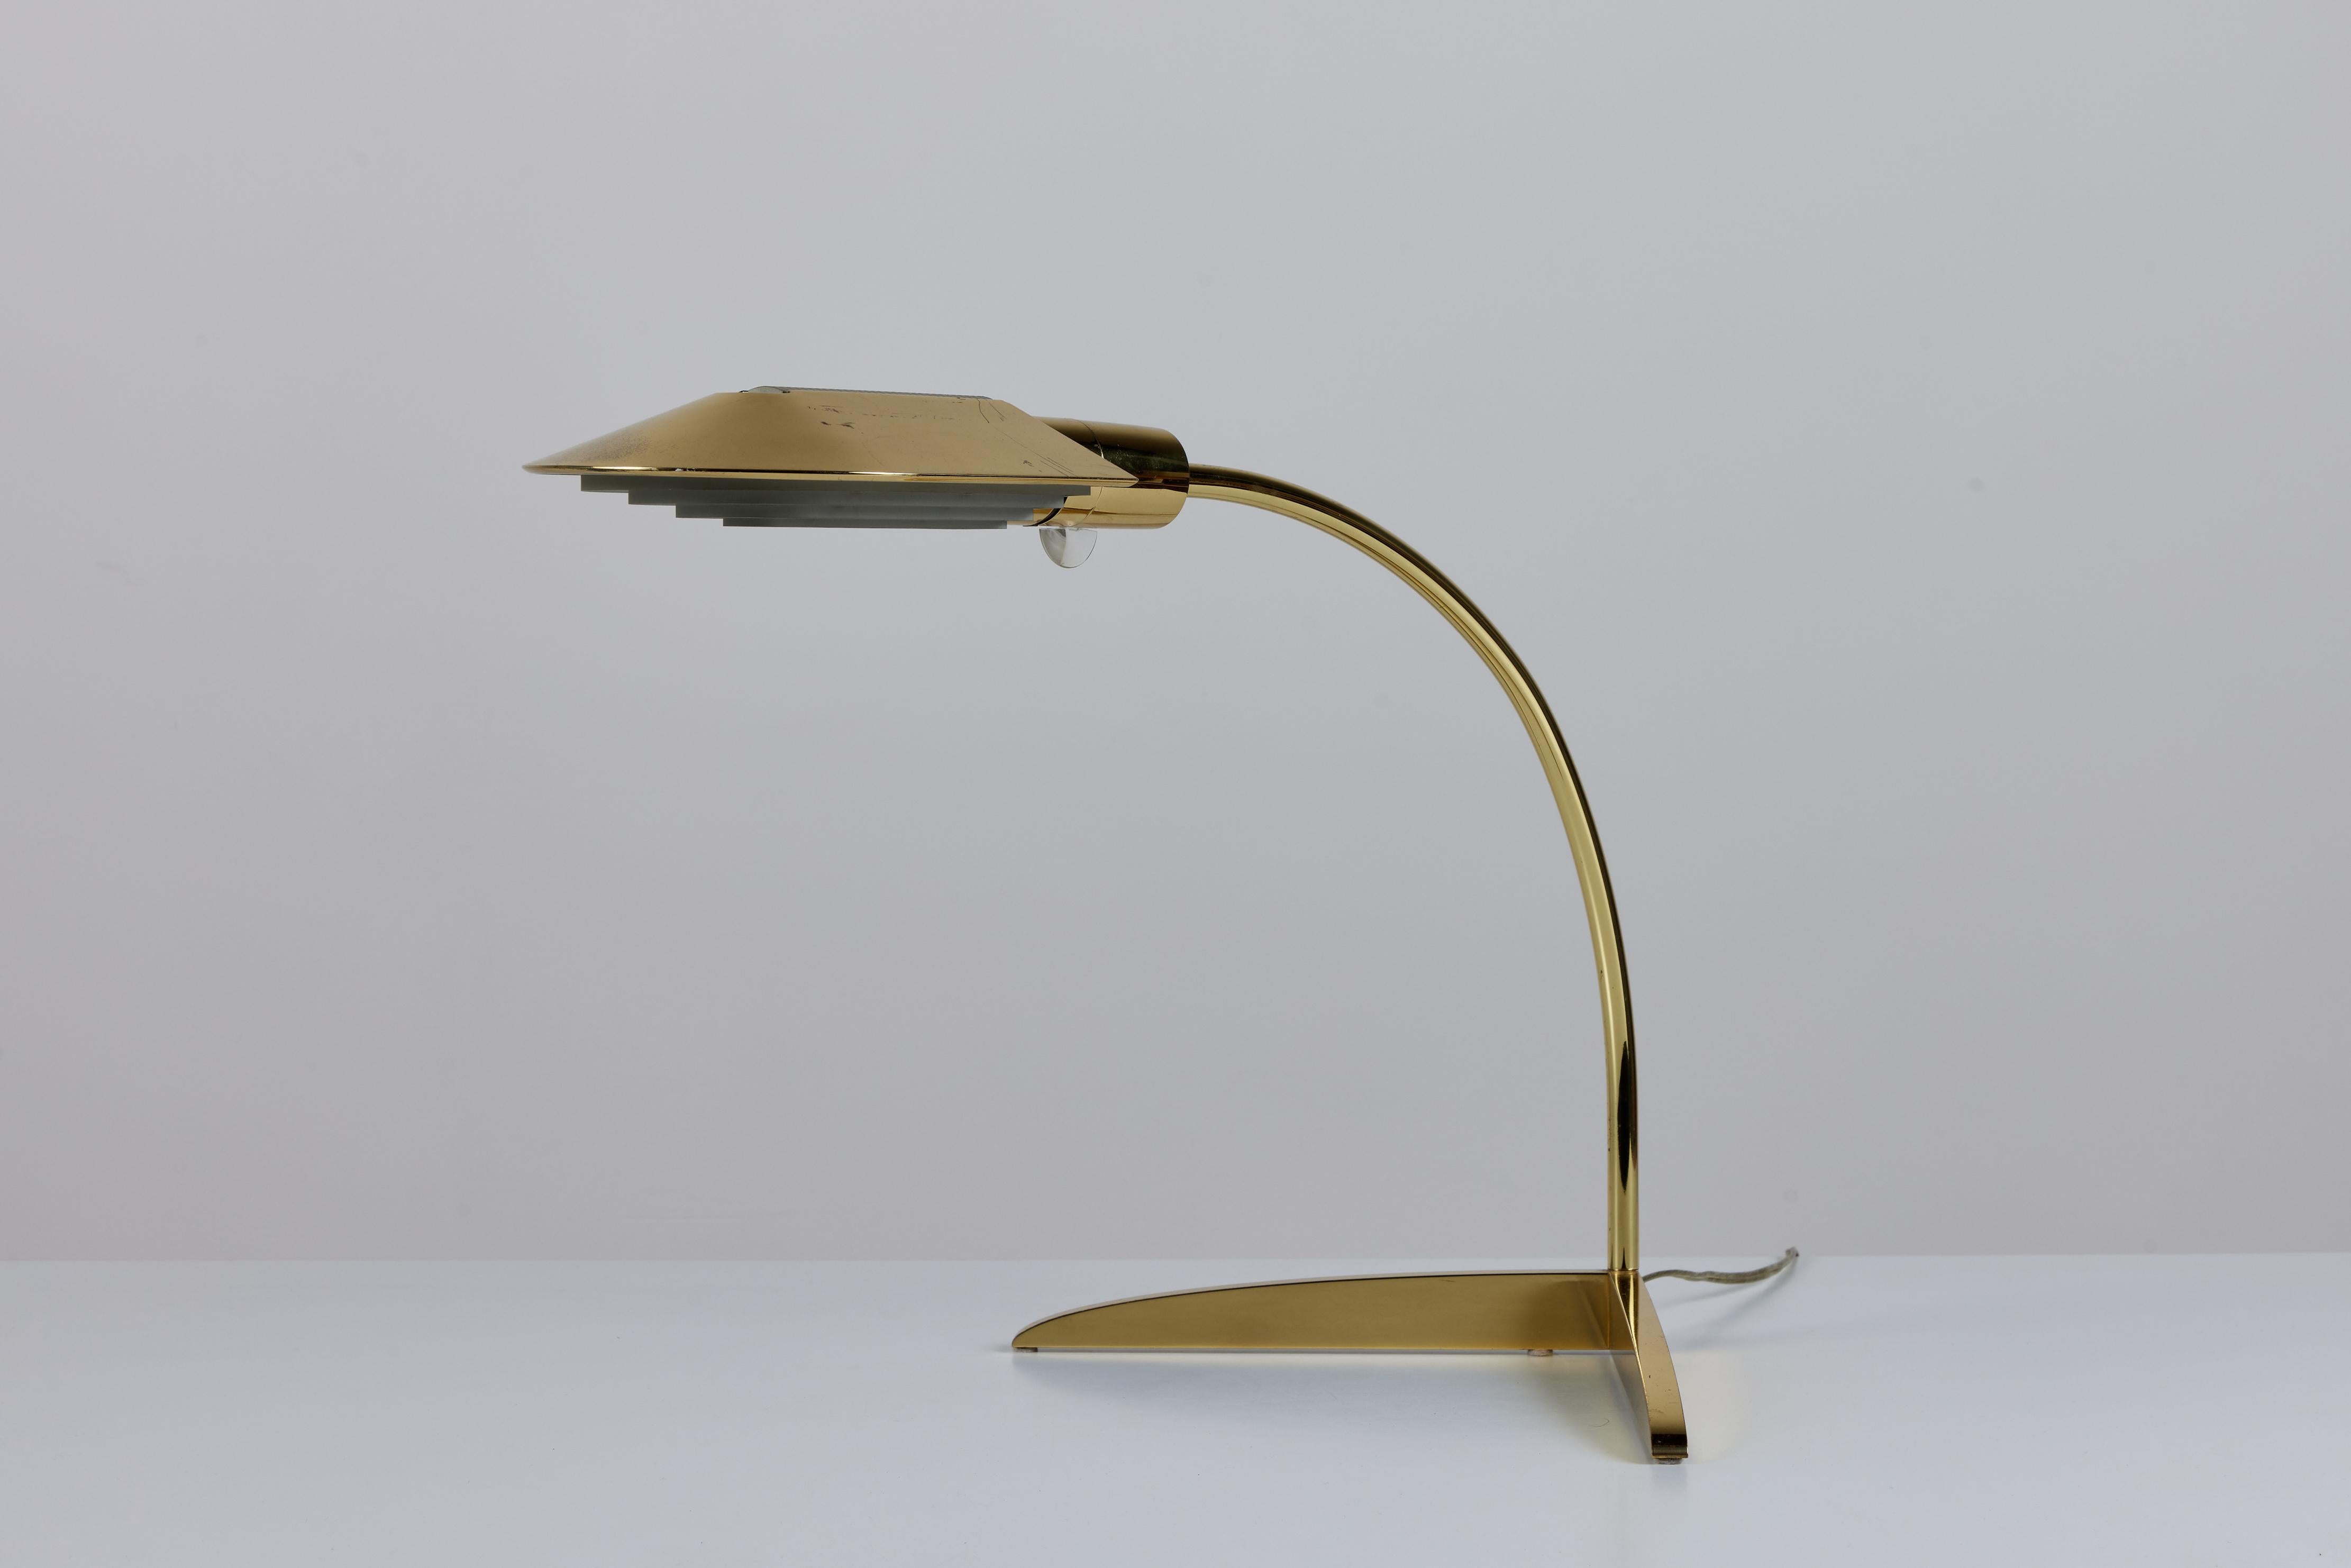 Designed in the 1970s, the brass desk lamp by Cedric Hartman is an enduring design classic. The modernist lamp features a domed oval brass shade attached to a curved stem that offers focused task lighting. The arched brass pole terminates into a